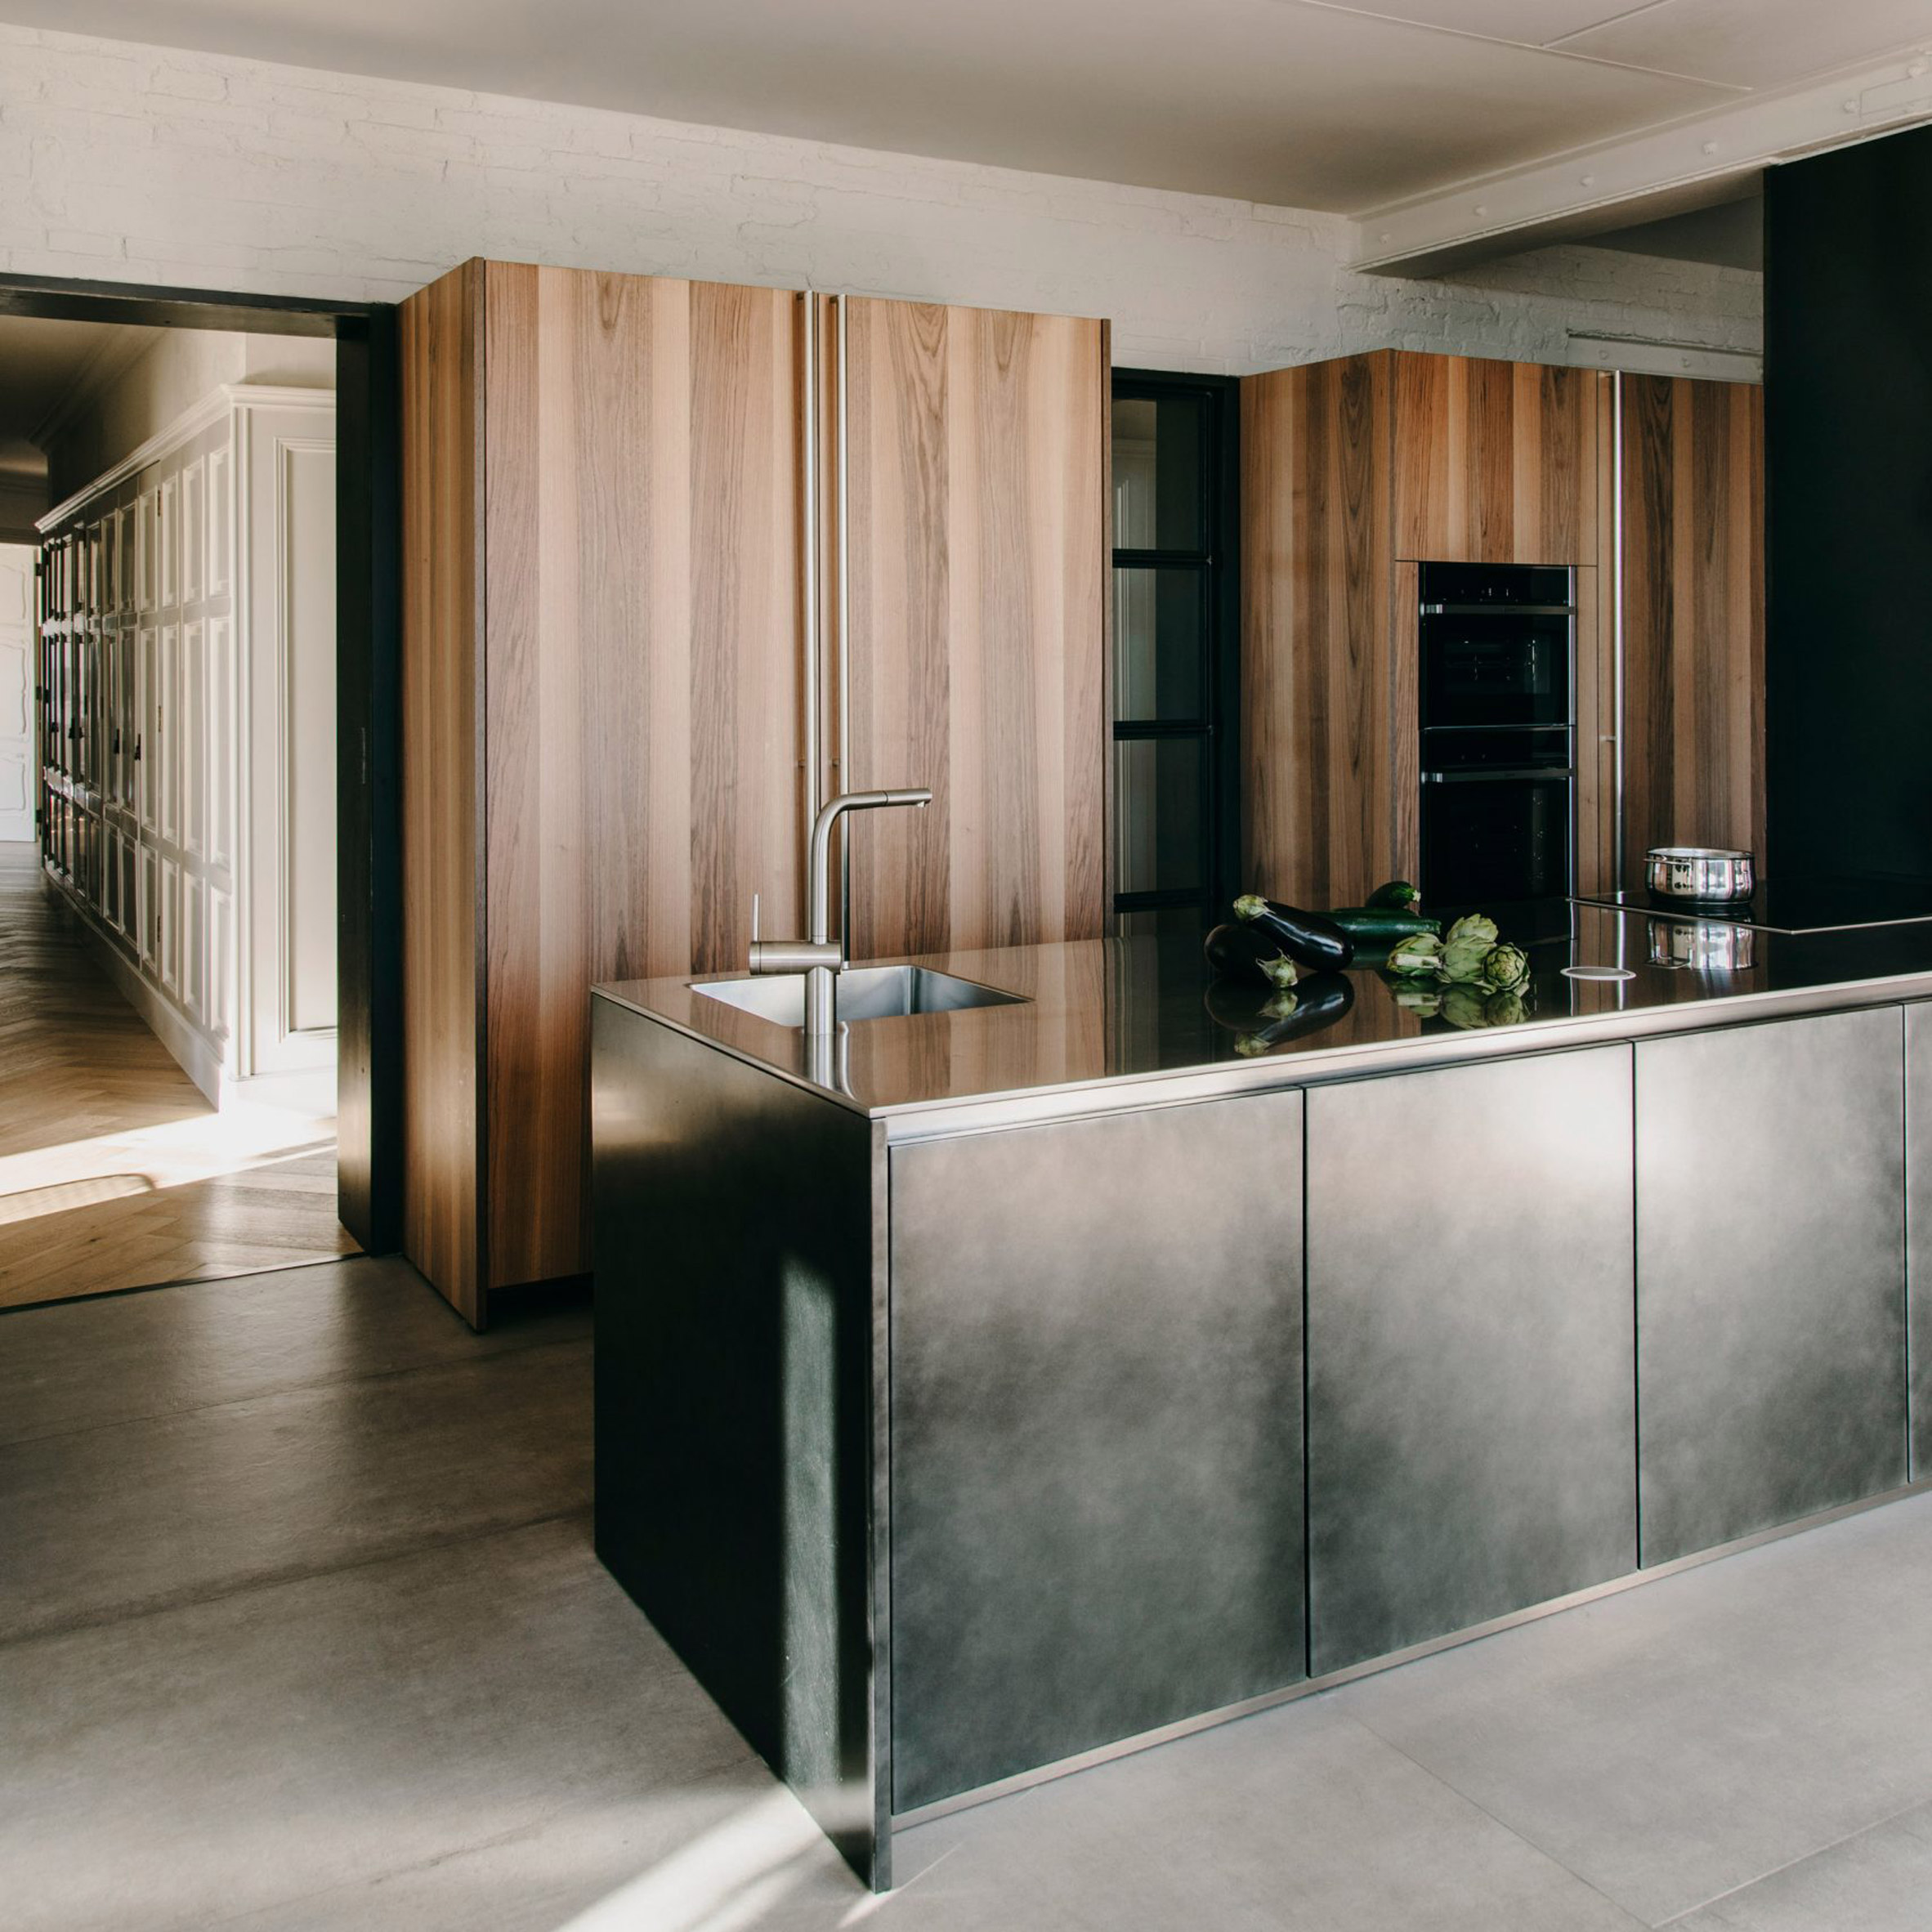 Ten steely kitchens that use metal as their primary material